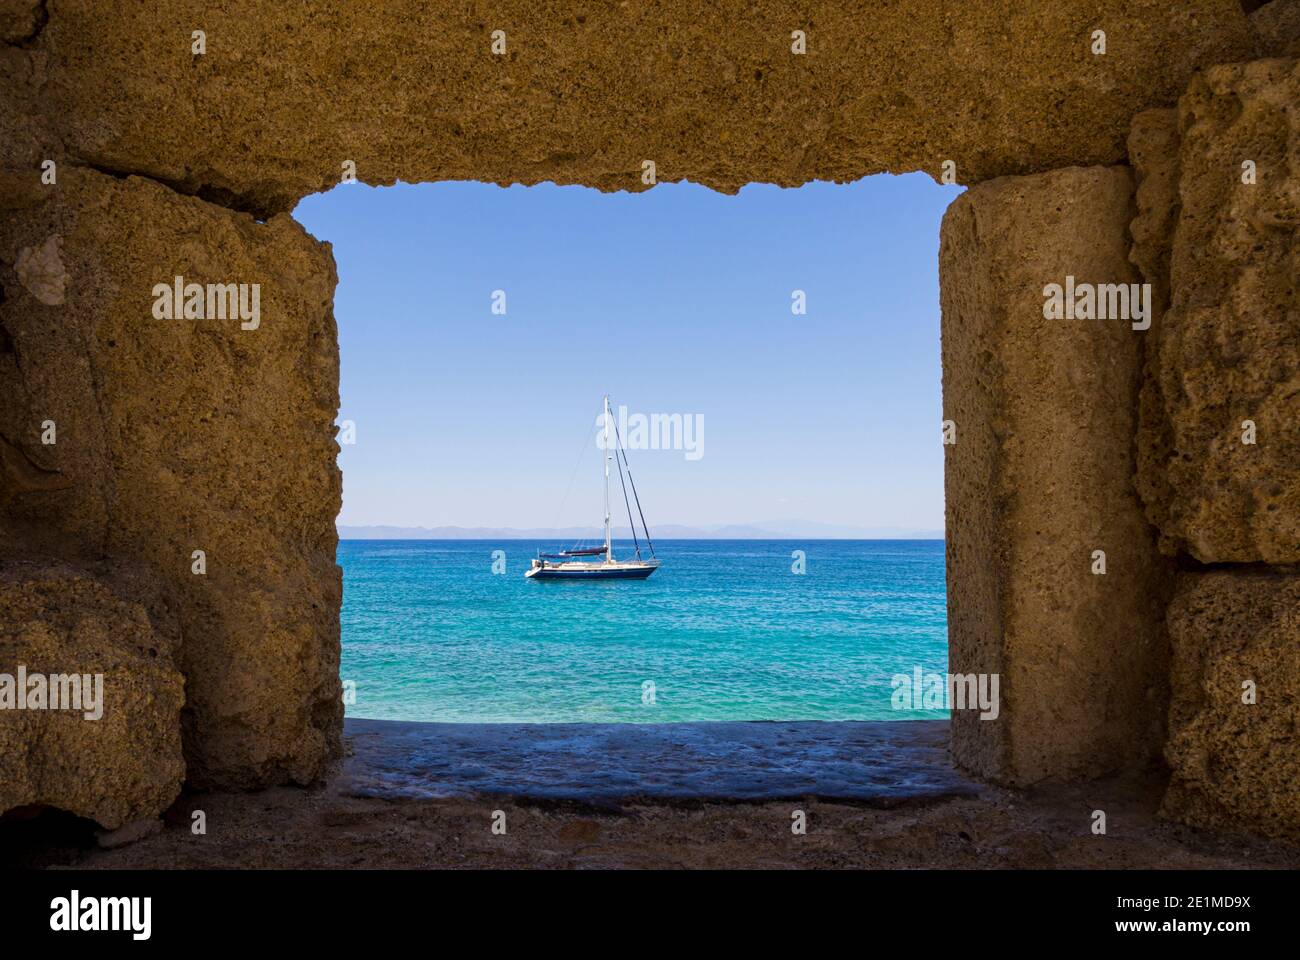 Yacht on the Aegean Sea framed through the old walls of Rhodes Town, Rhodes Isalnd, Dodecanese, Greece Stock Photo